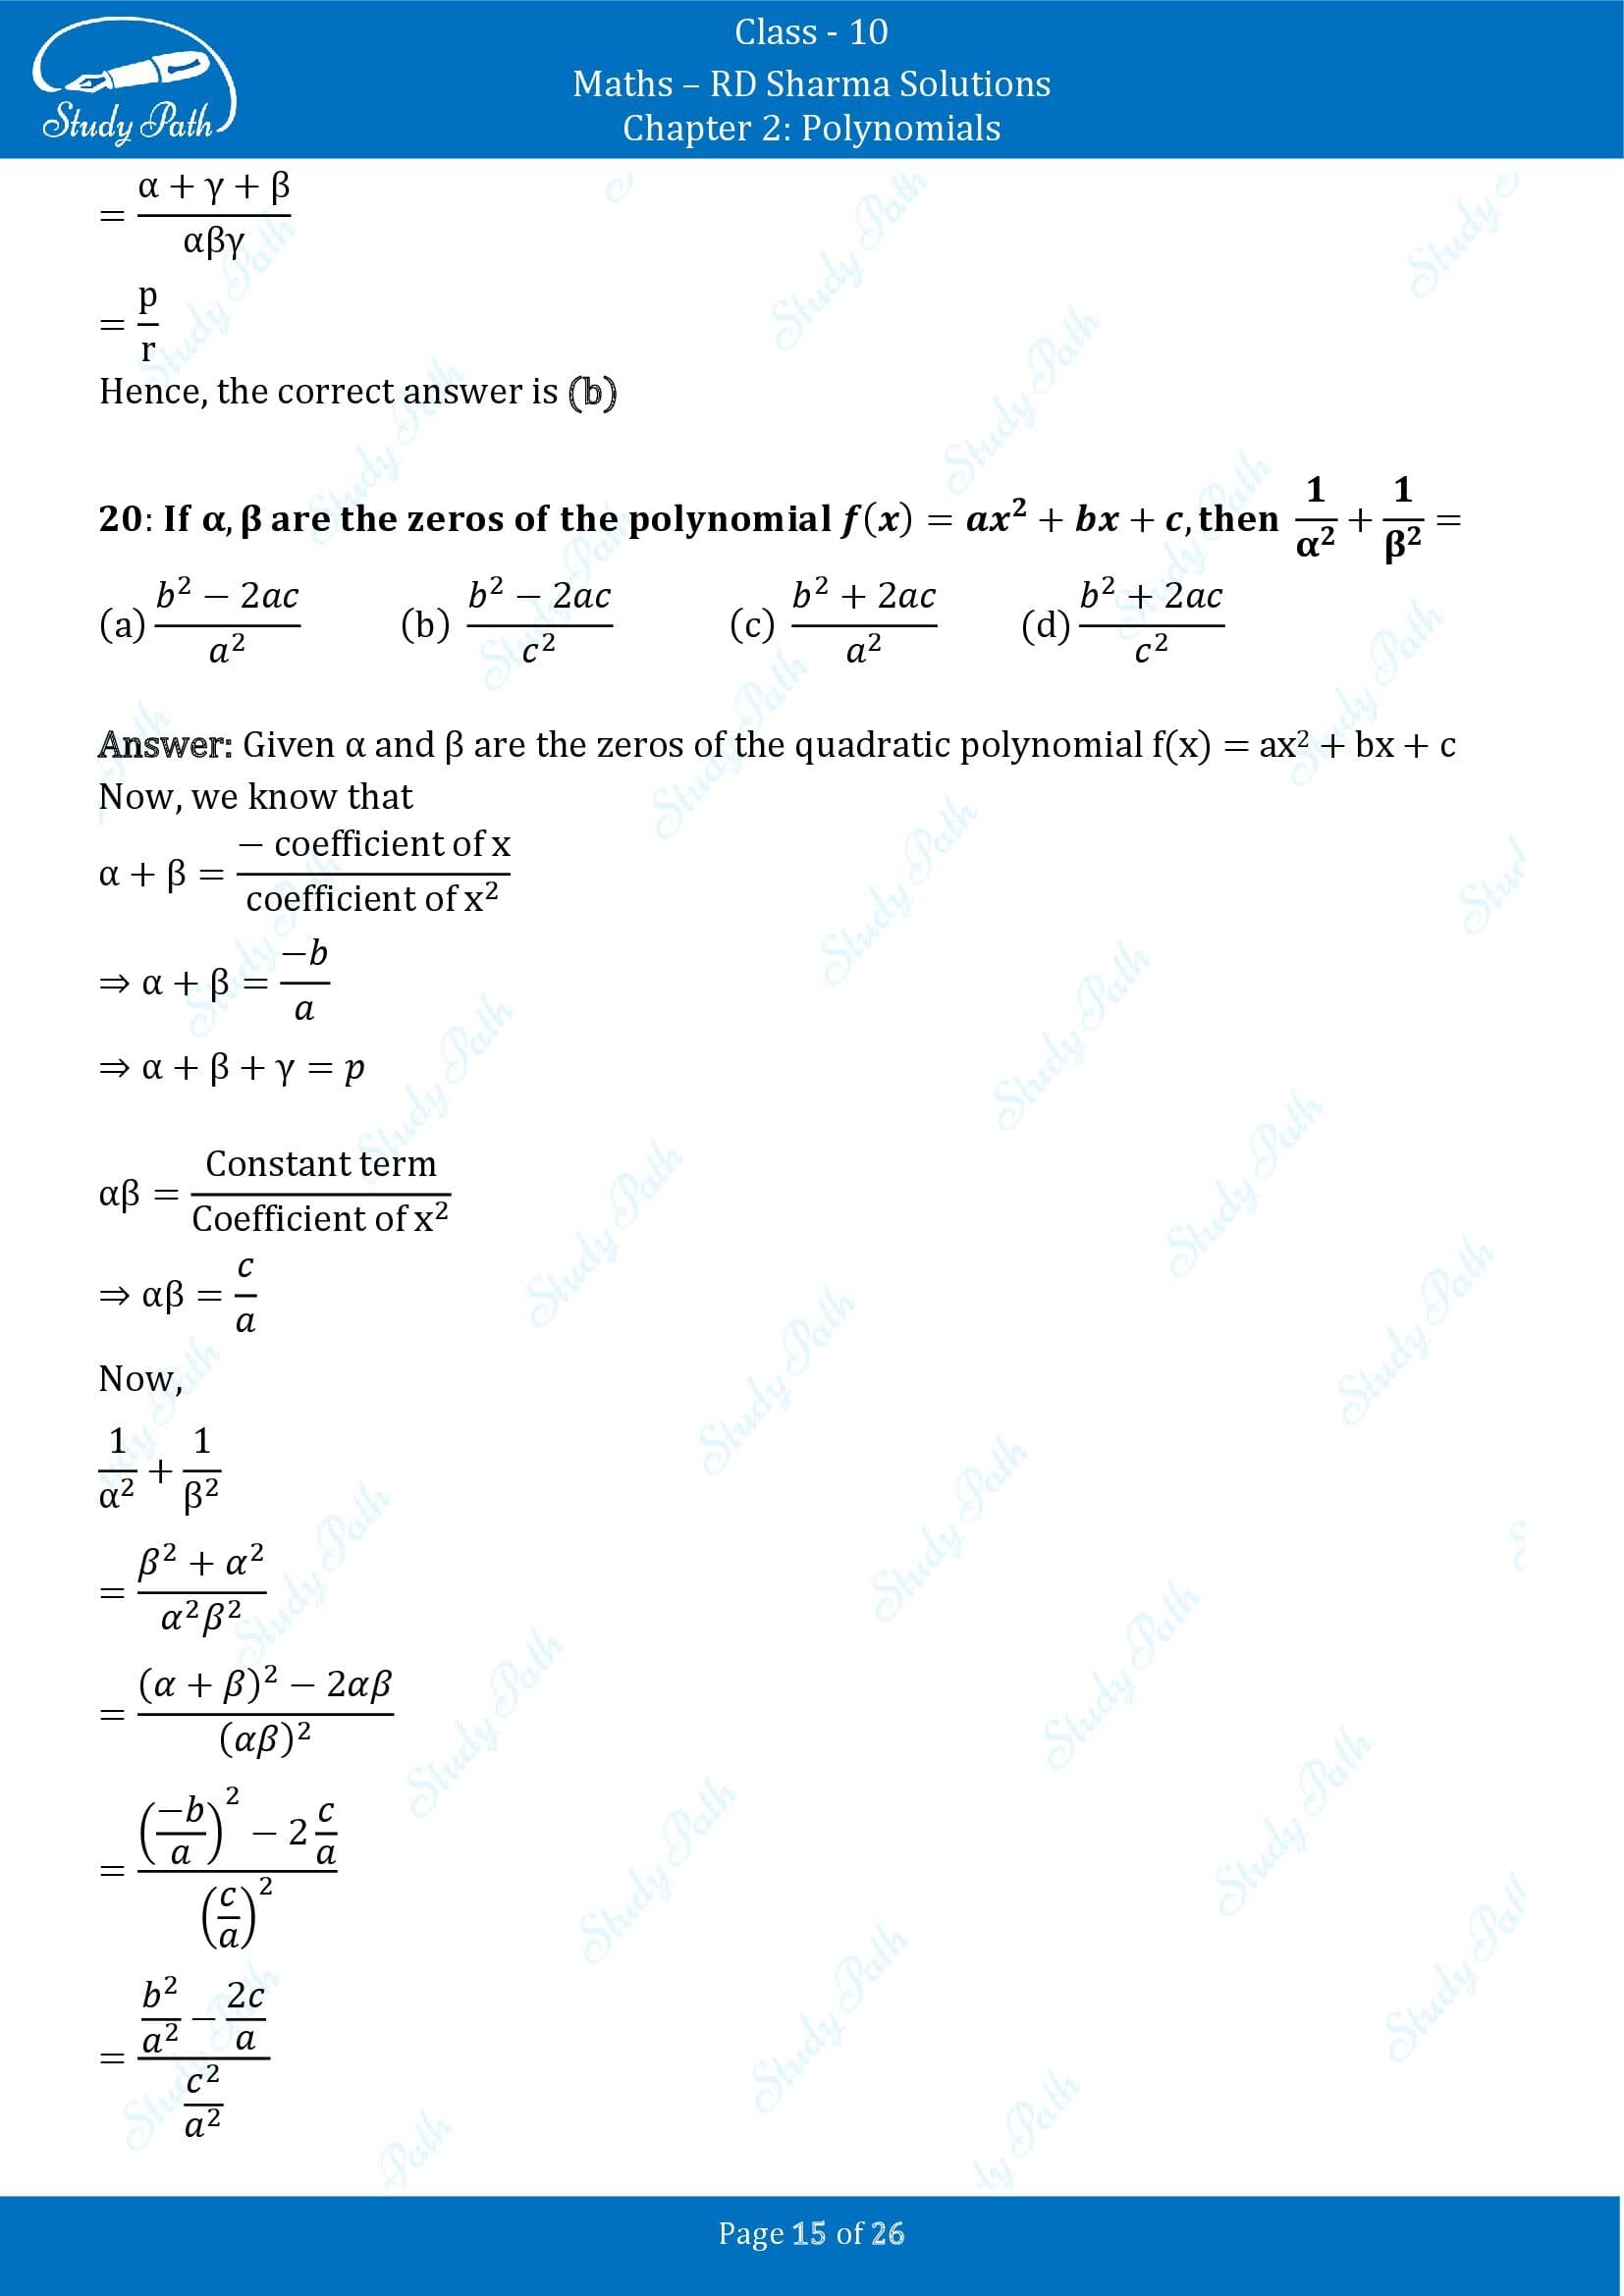 RD Sharma Solutions Class 10 Chapter 2 Polynomials Multiple Choice Questions MCQs 00015